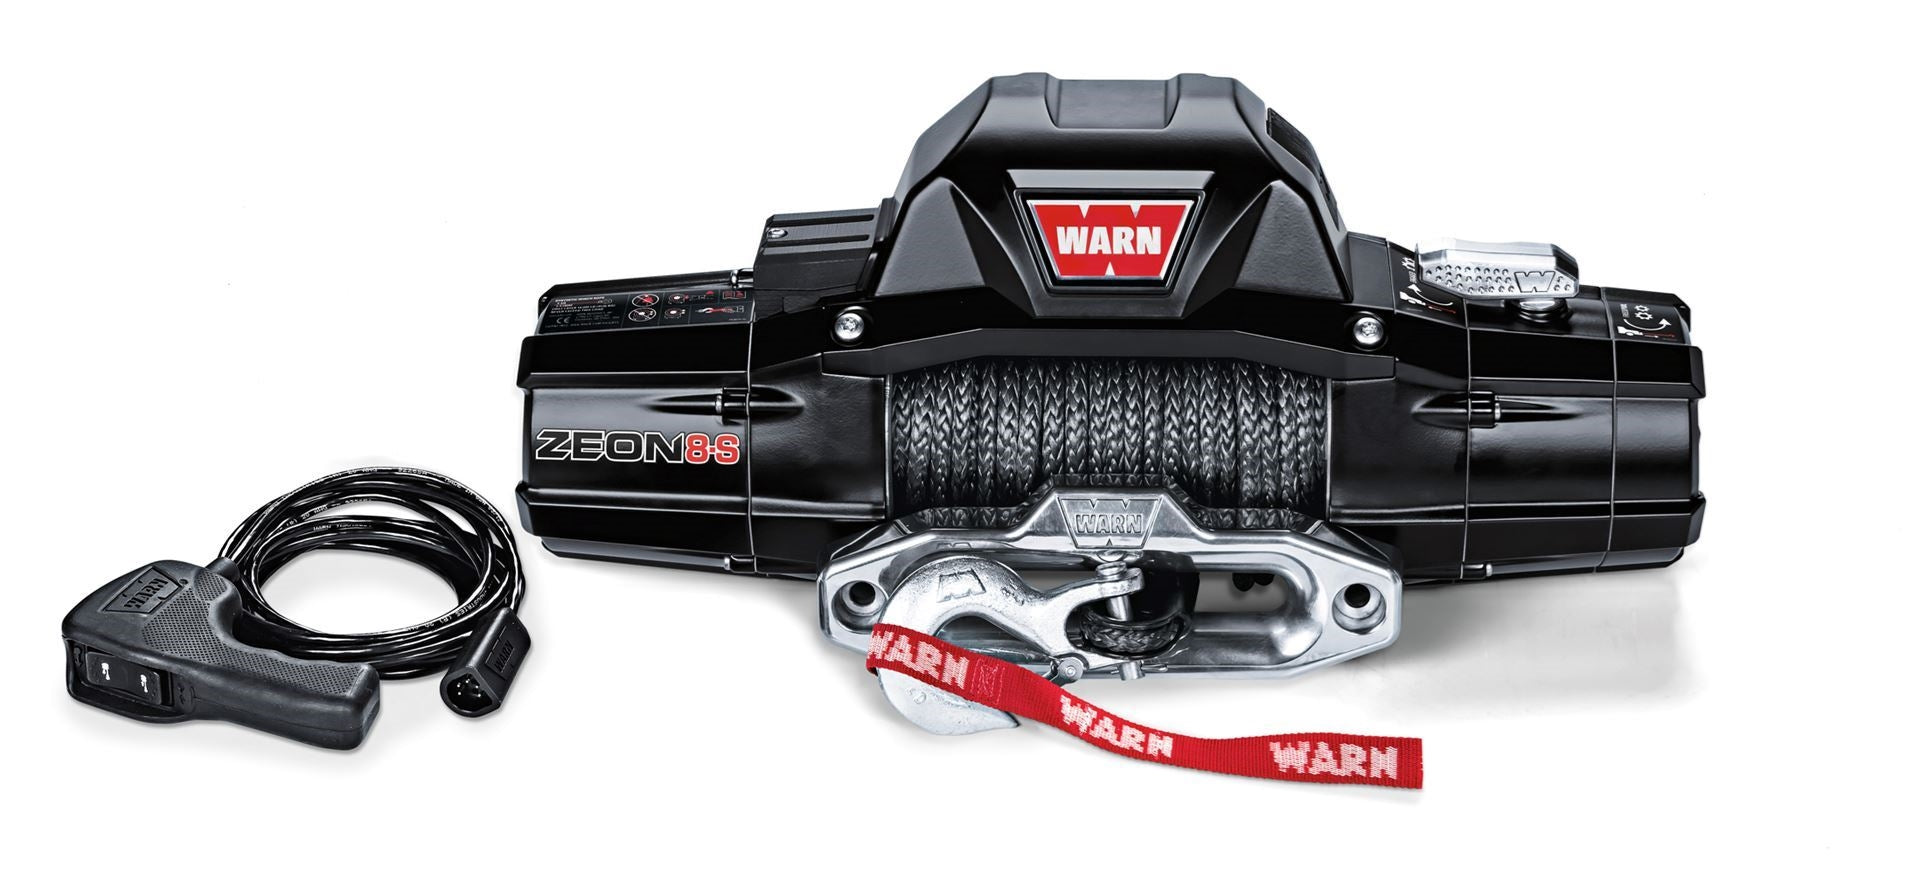 Warn Zeon 8 12v Electric Winch close up